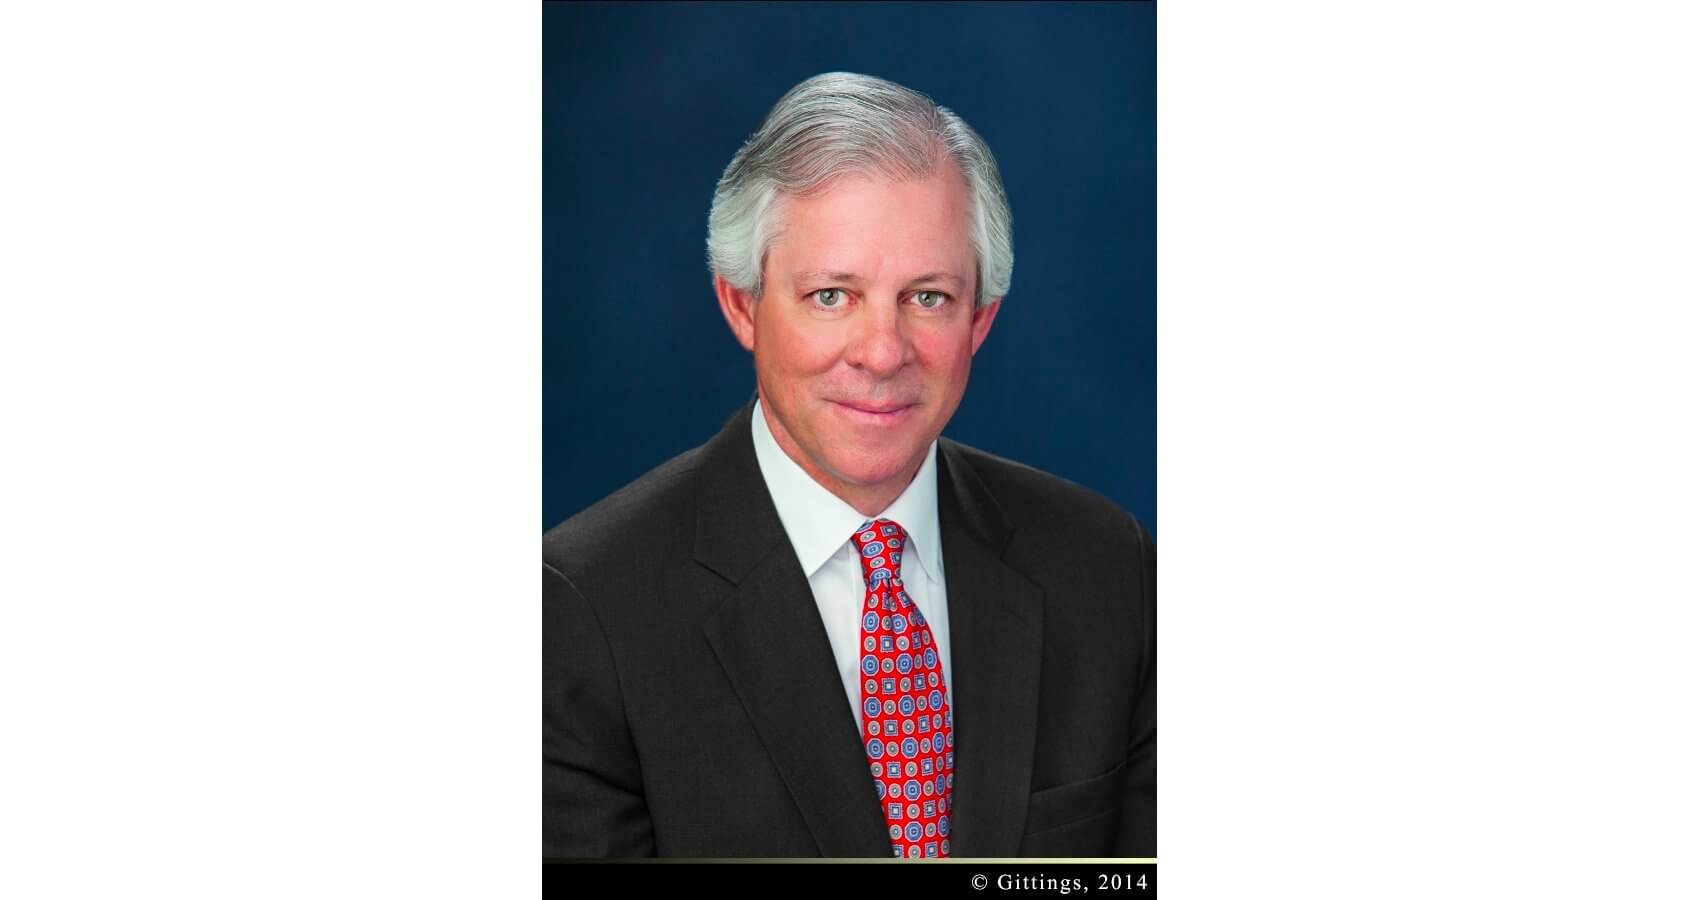 Robert C. Robbins, M.D., president and chief executive officer of the Texas Medical Center